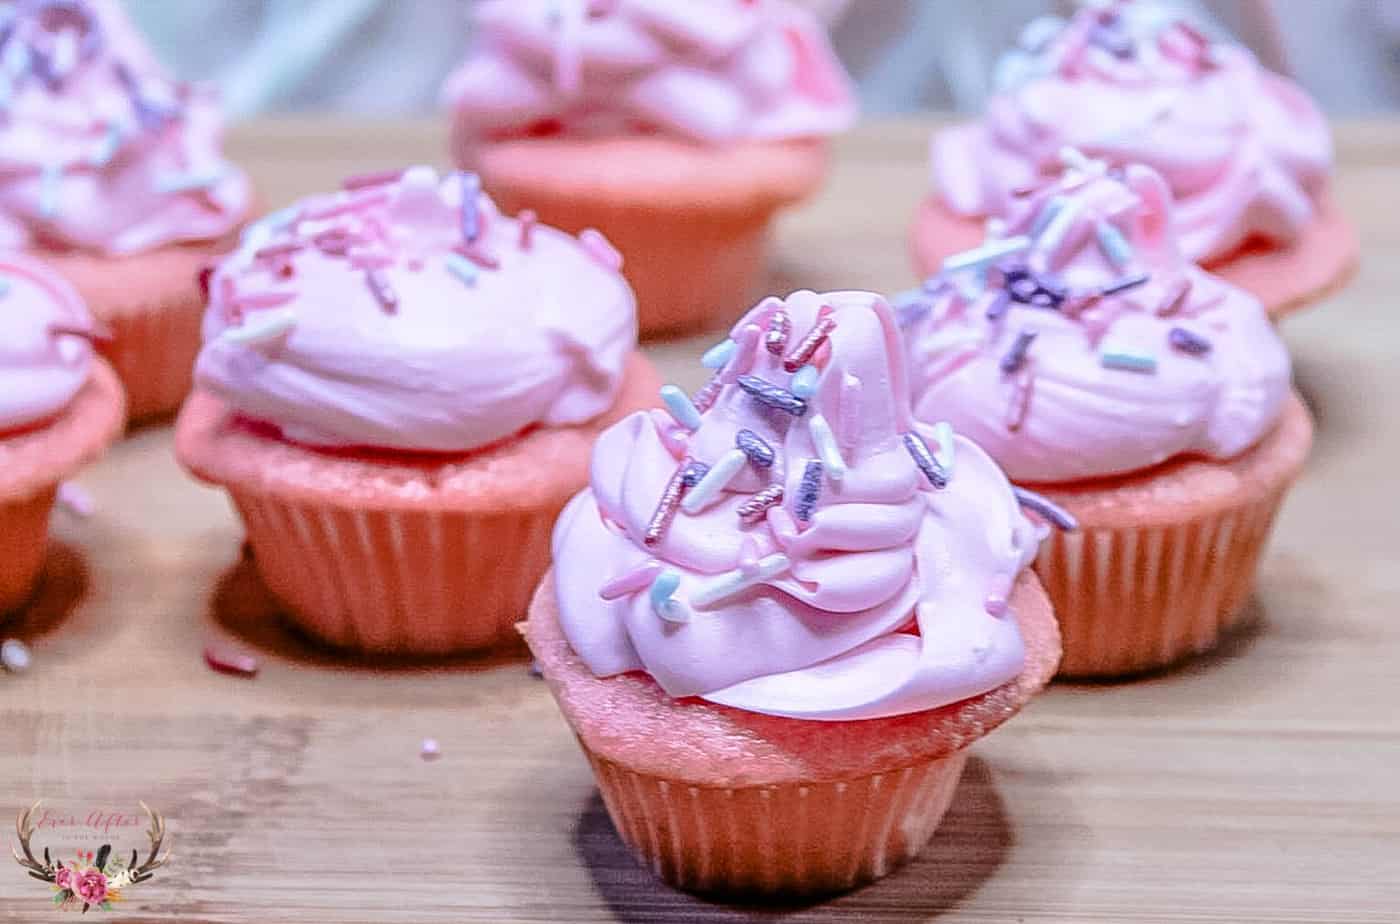 Celebrate Awards Night with Pink Champagne Cupcakes made with Nellie’s Free Range Eggs